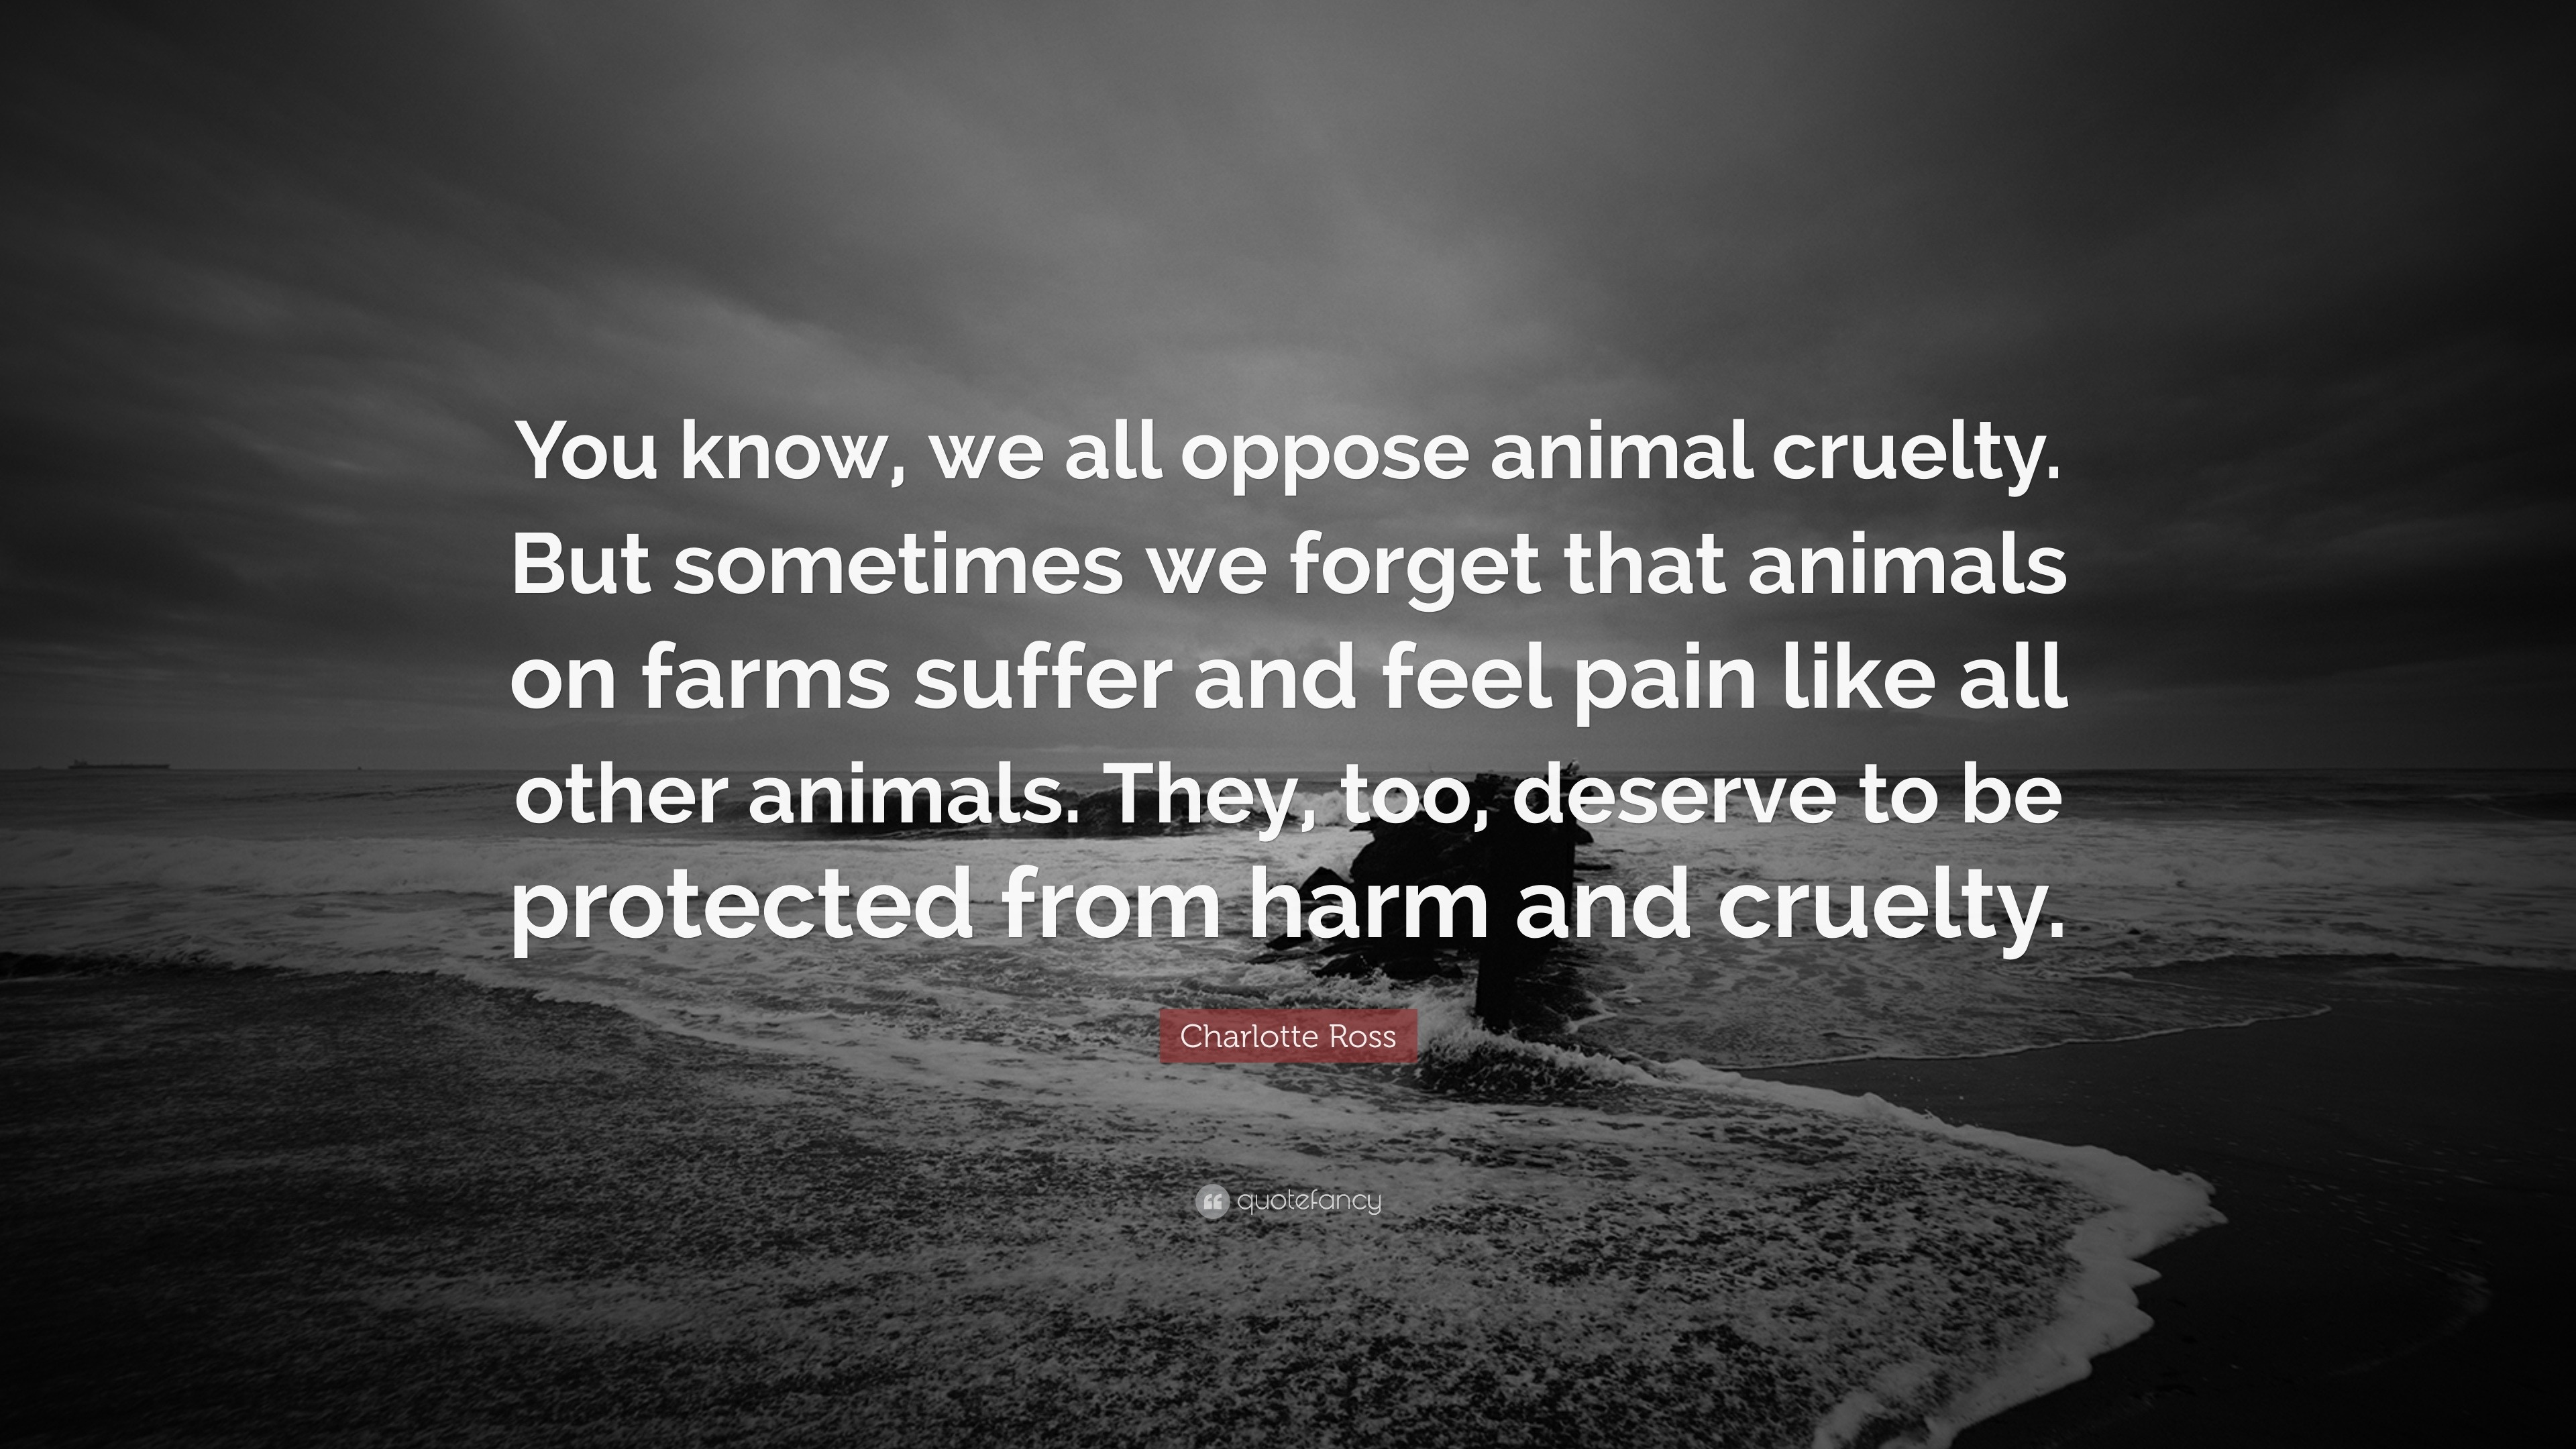 Charlotte Ross Quote: “You know, we all oppose animal cruelty. But  sometimes we forget that animals on farms suffer and feel pain like all  othe...”